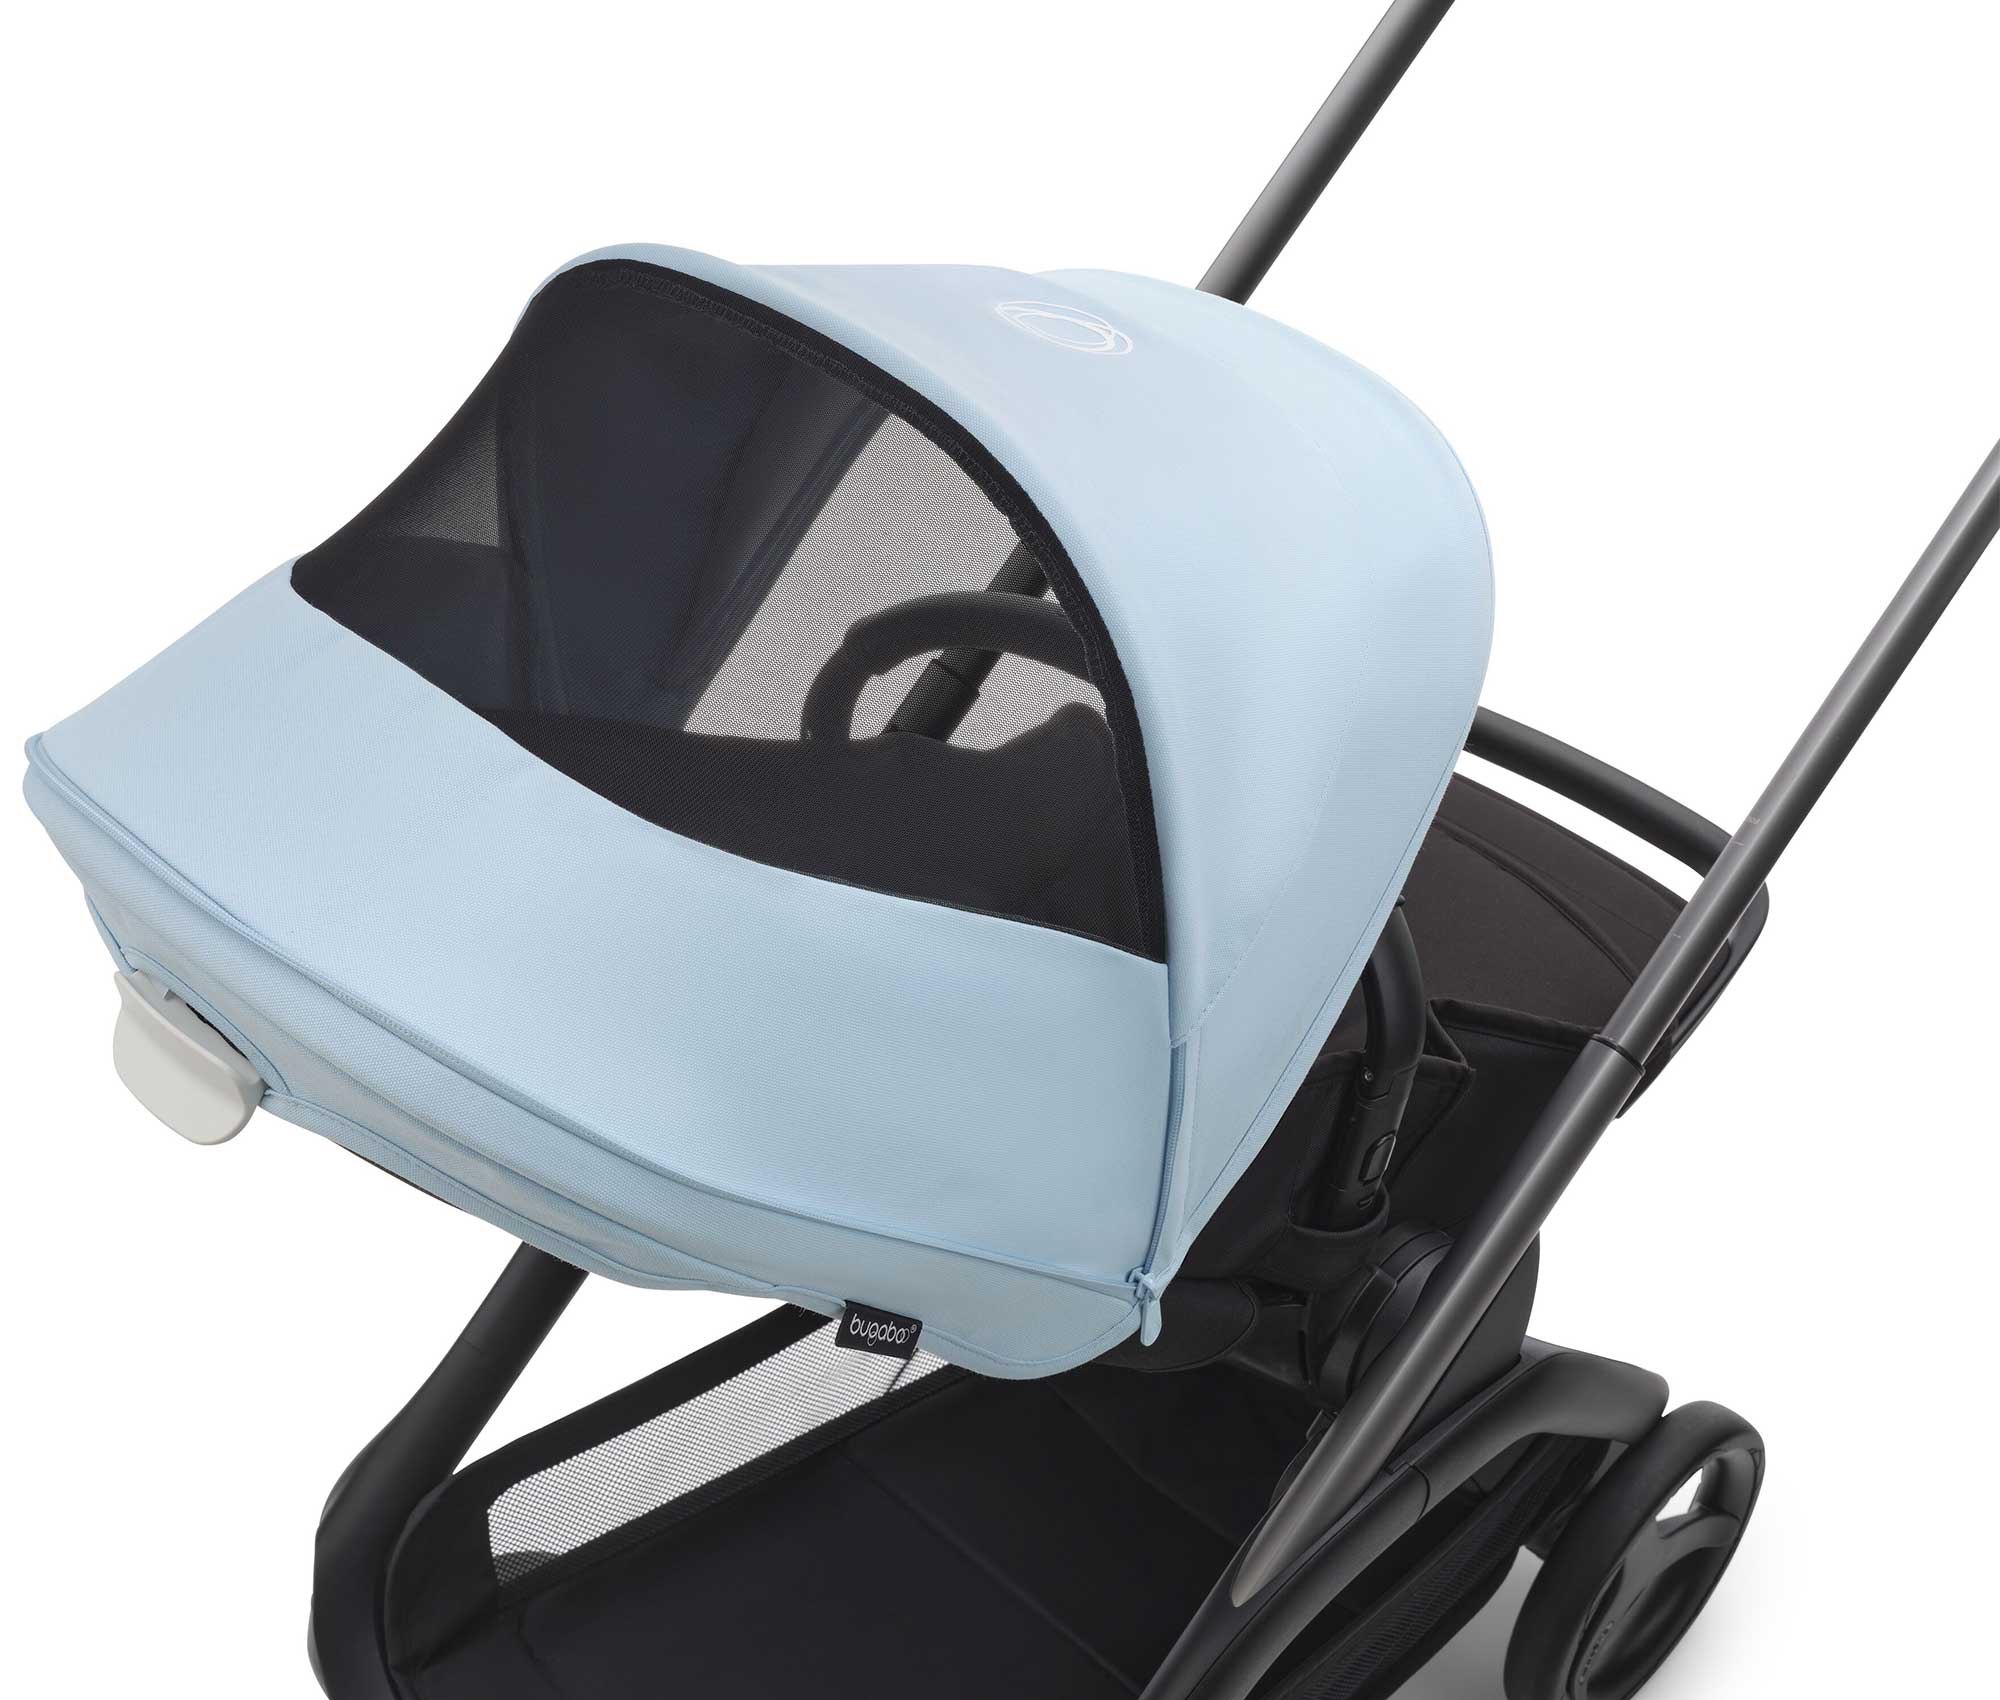 Bugaboo Travel Systems Bugaboo Dragonfly Ultimate Bundle in Graphite/Midnight Black/Skyline Blue 13808-GRA-MID-SKY